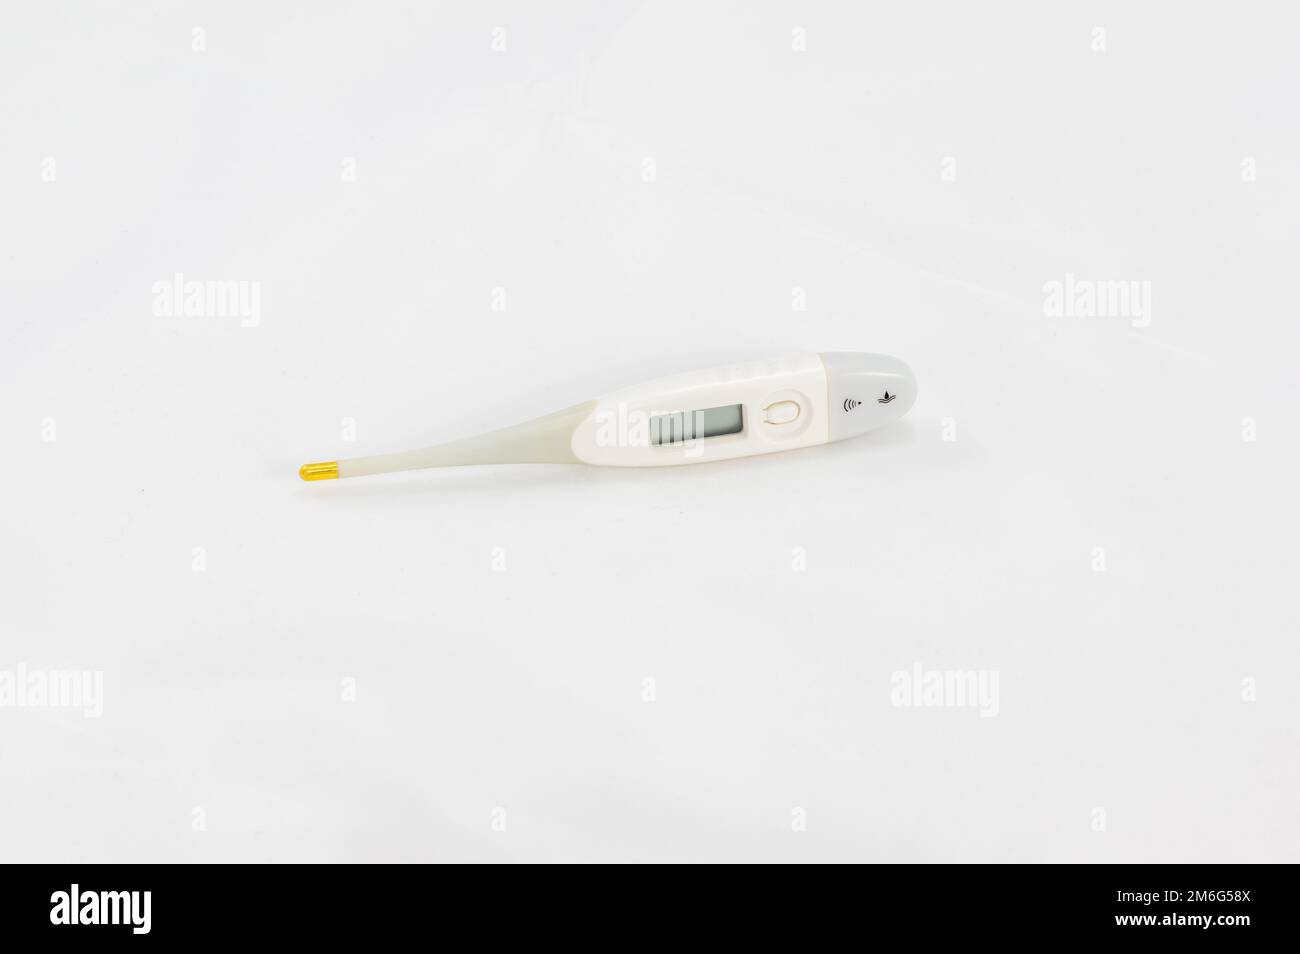 https://c8.alamy.com/comp/2M6G58X/digital-thermometer-with-gold-tip-on-a-white-background-2M6G58X.jpg